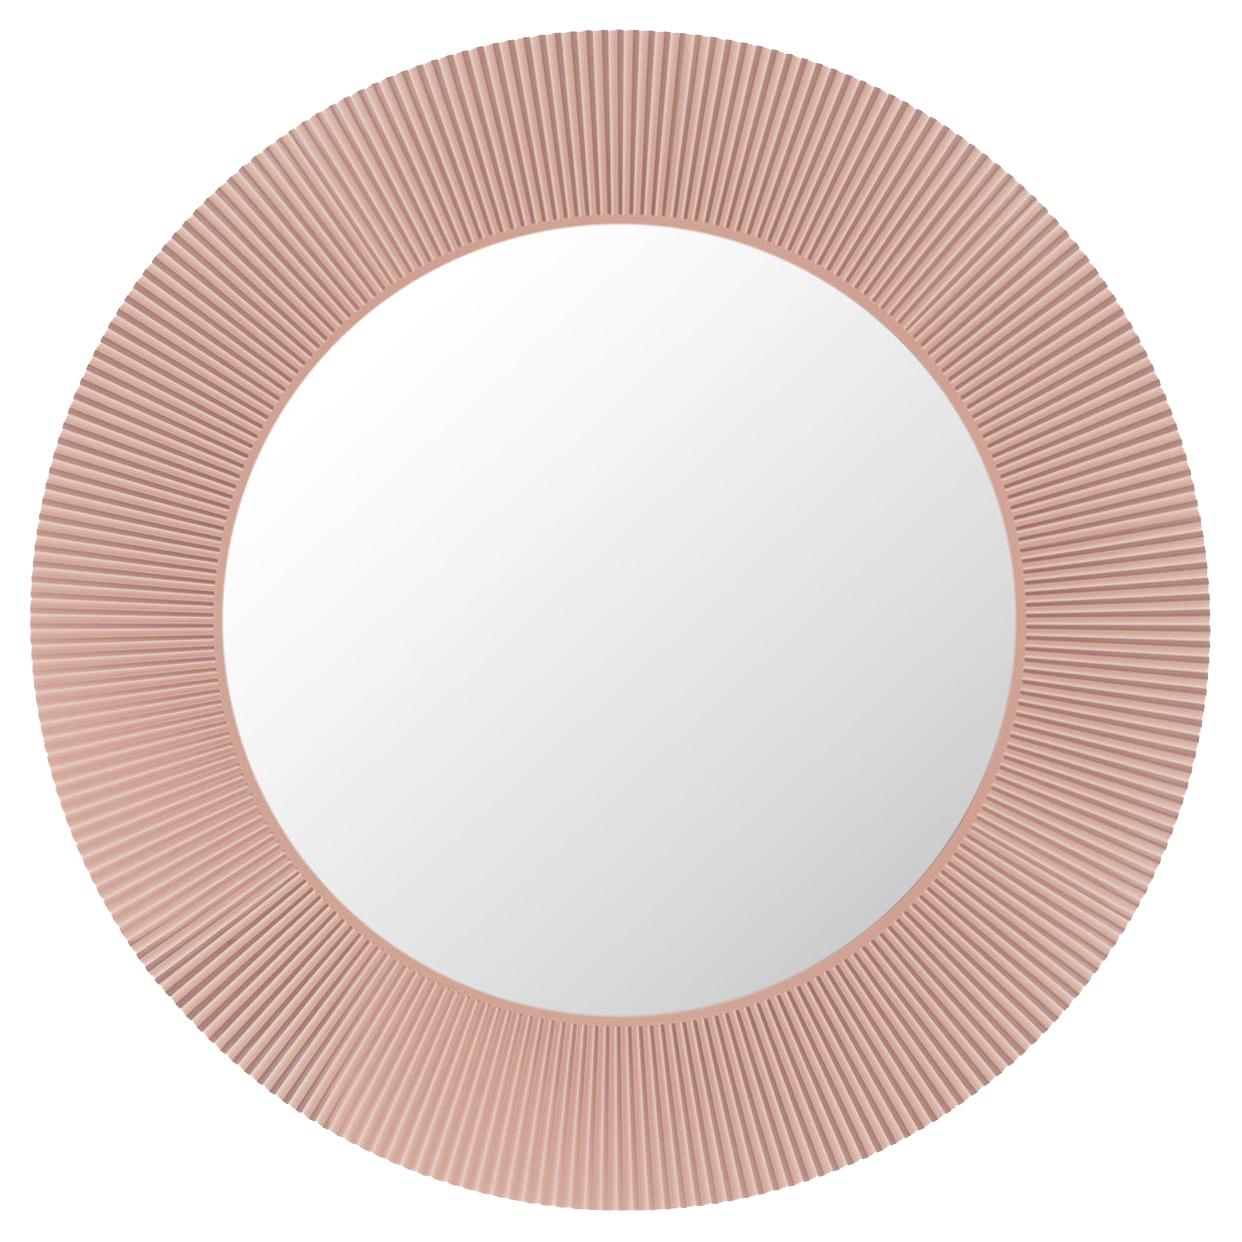 Kartell All Saints Mirror in Copper by Ludovica and Roberto Palomba